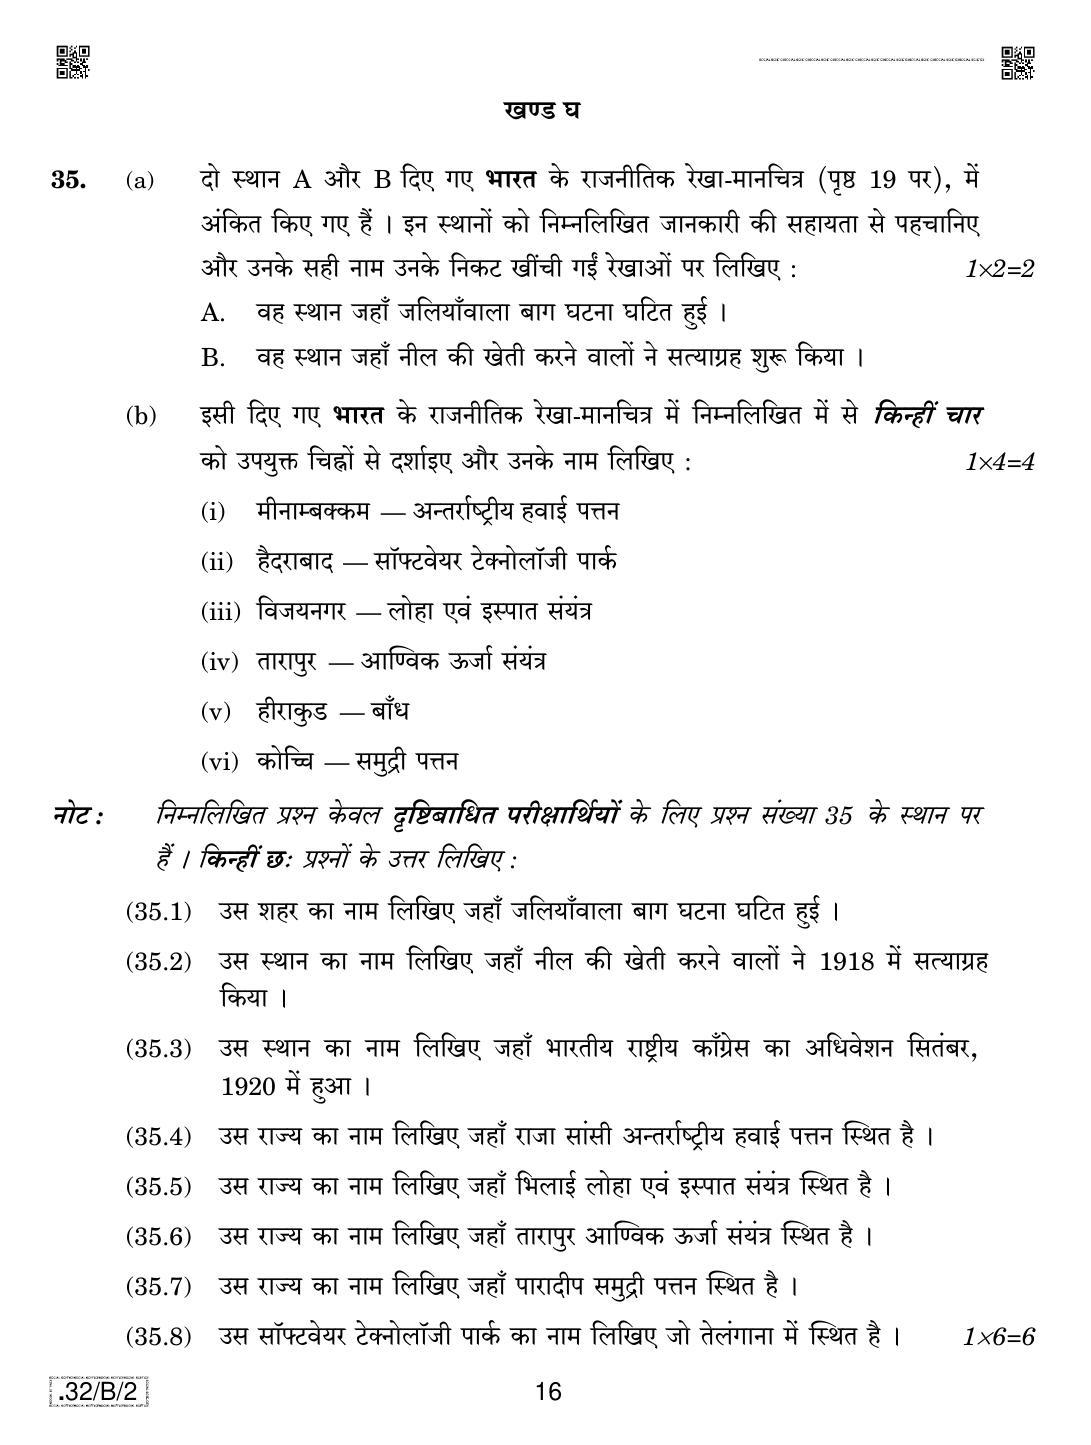 CBSE Class 10 32-C-2 Social Science 2020 Compartment Question Paper - Page 16